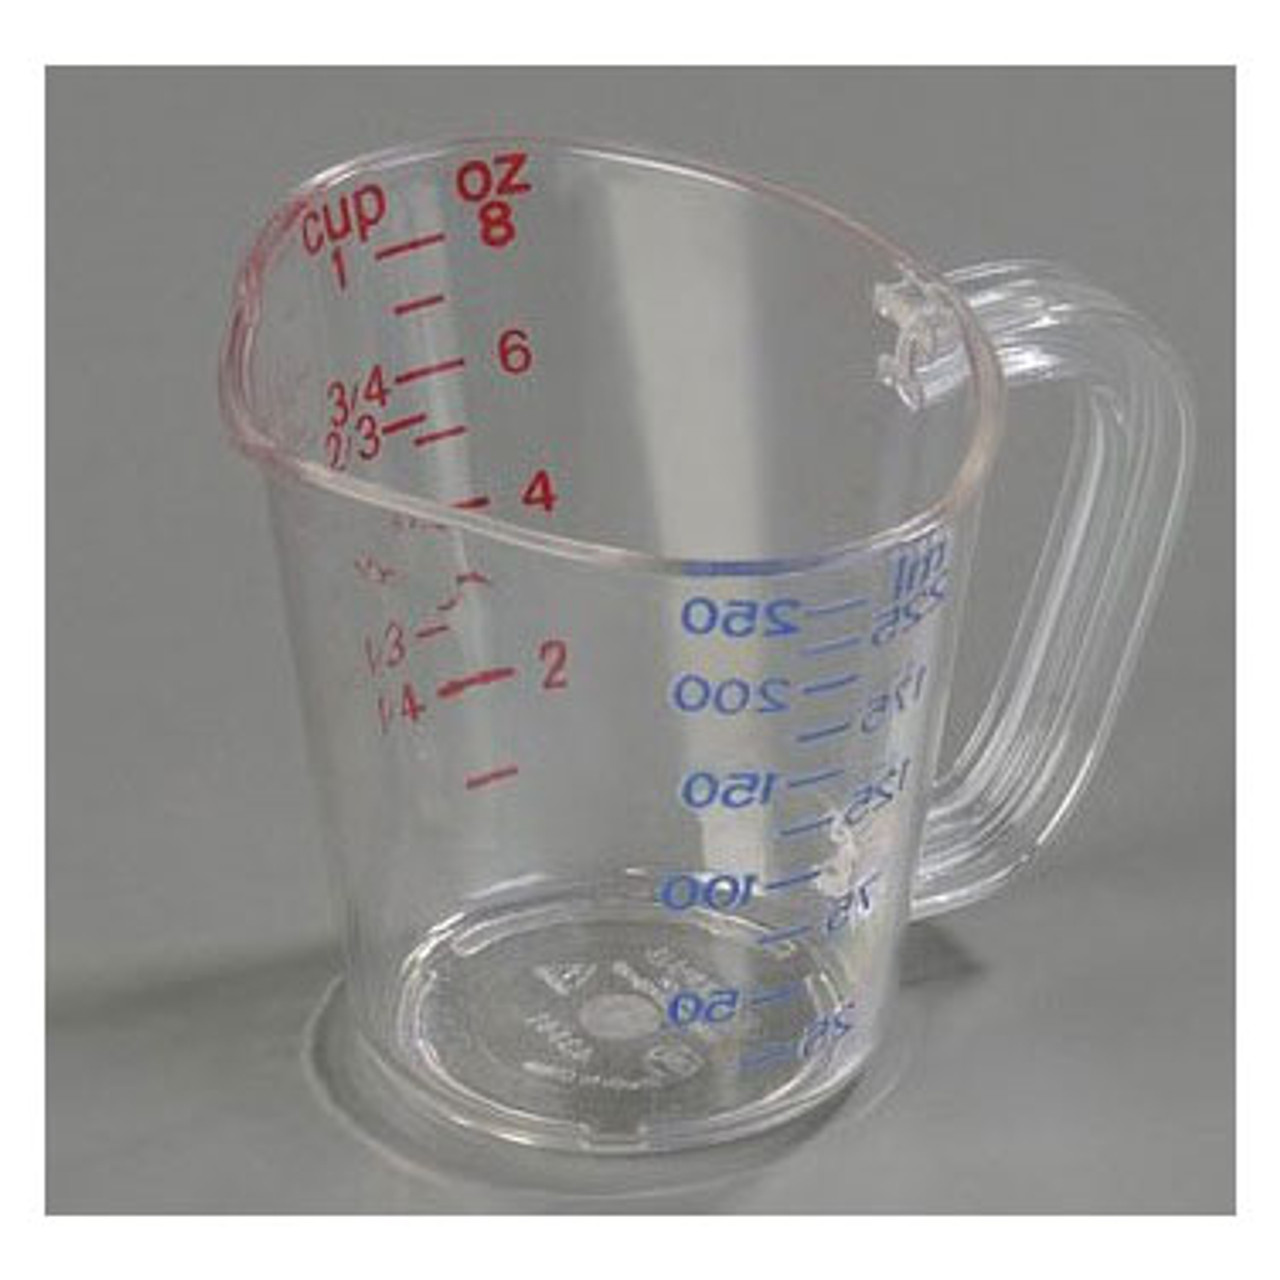 https://cdn11.bigcommerce.com/s-g3i86bef61/images/stencil/1280x1280/products/3195/1019/Carlisle-4314107-Measuring-Cups__65897.1662041146.jpg?c=1